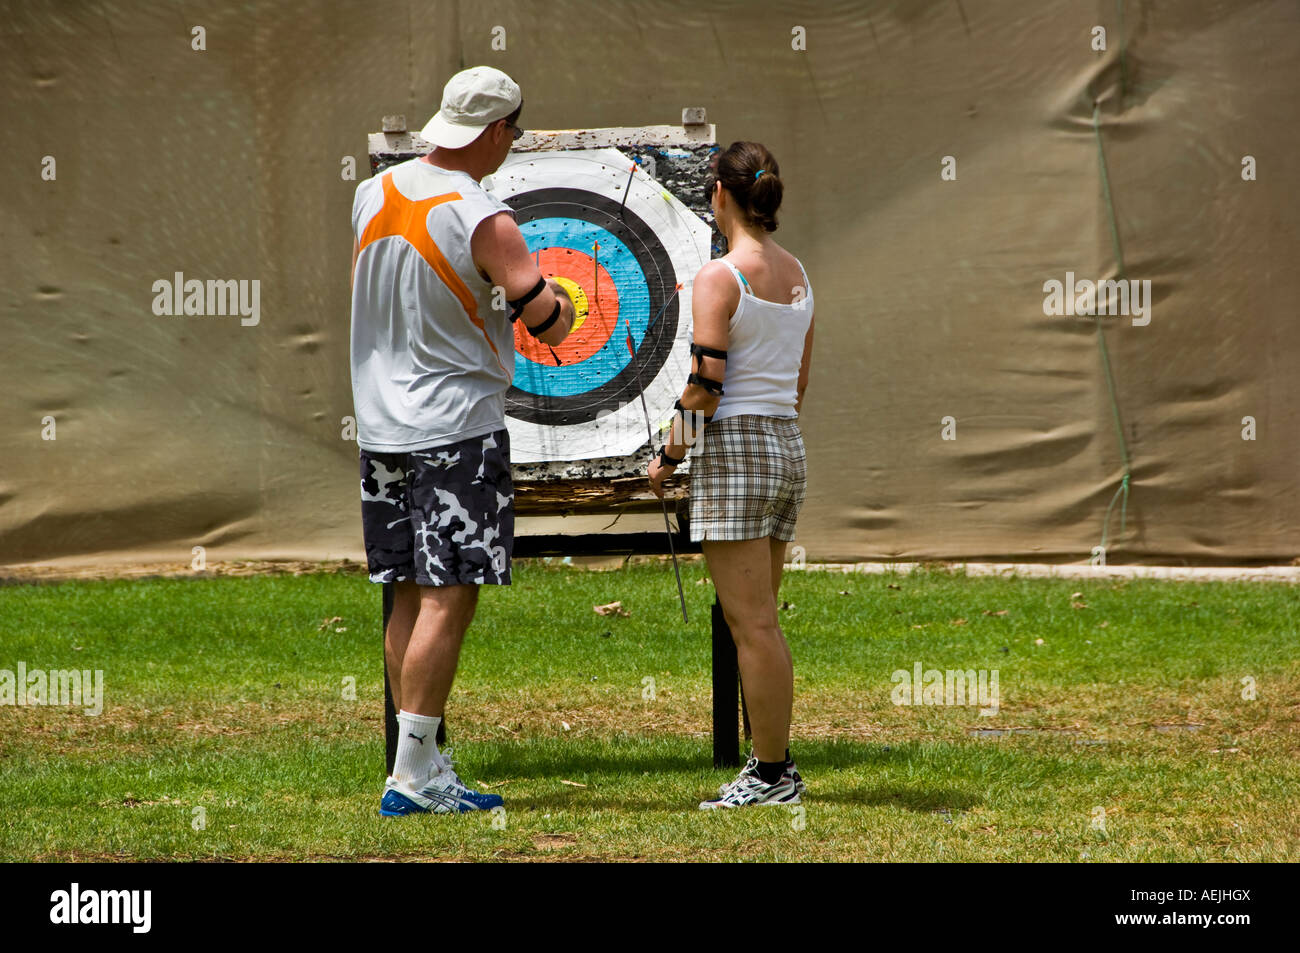 Archers control their results at the target Stock Photo